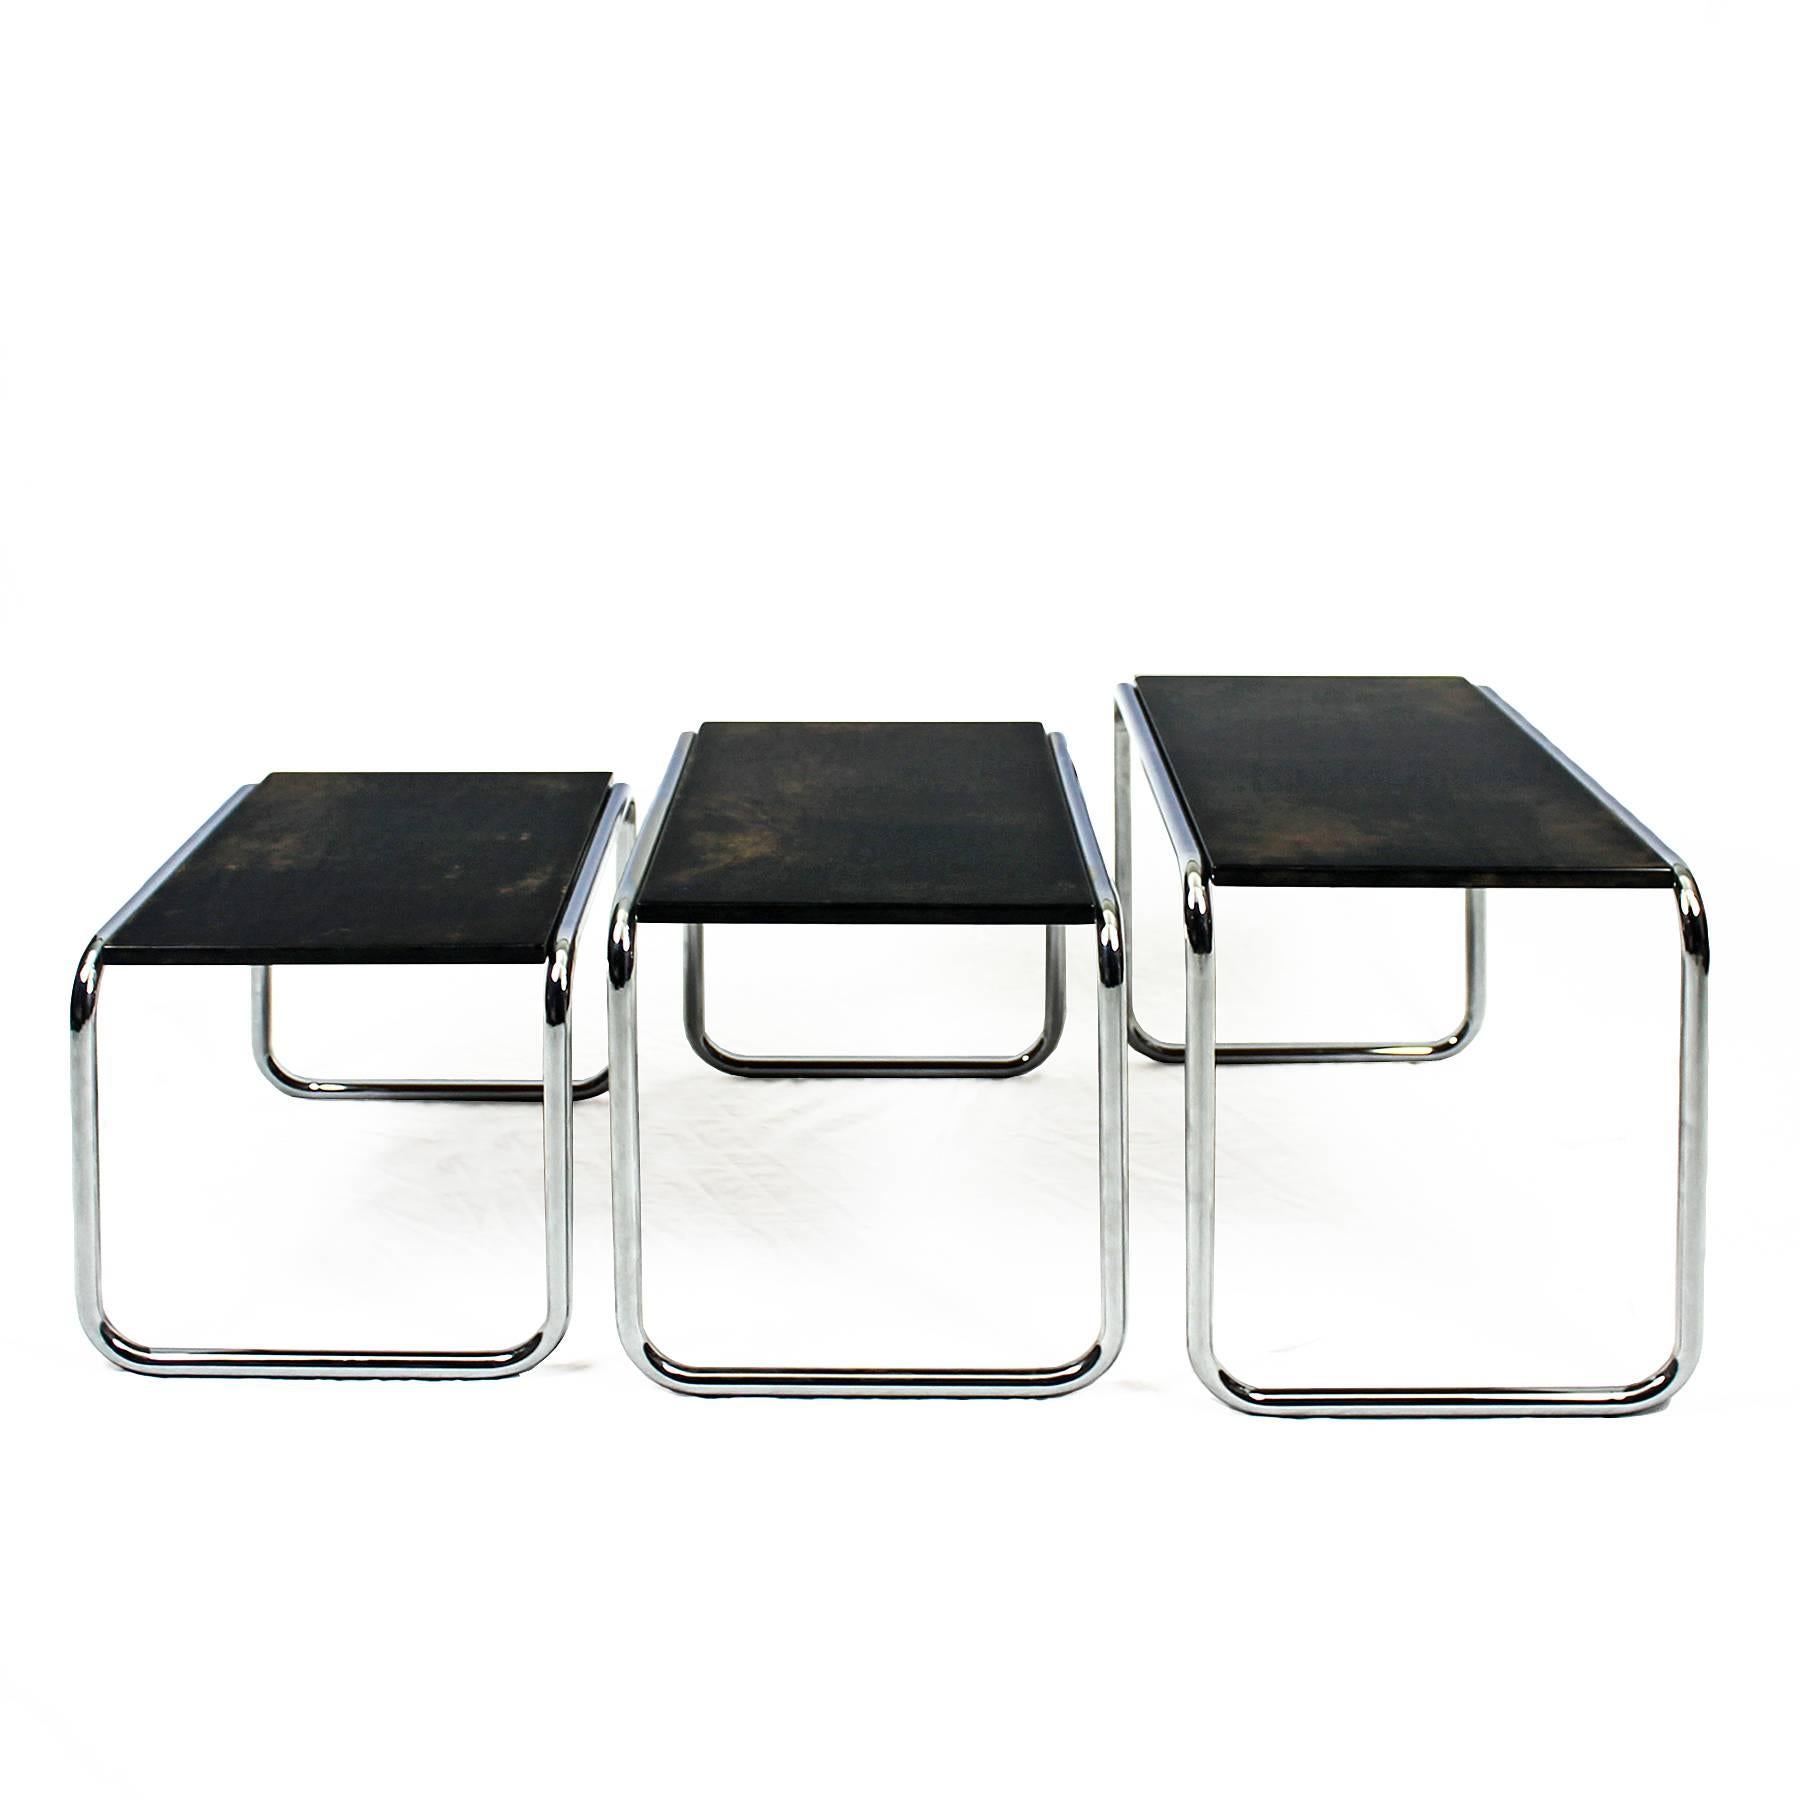 Splendid set of nesting tables, chromed plated metal structure, on top wood covered with stained and varnished parchment.
France, circa 1960

Measures: Big table 67 x 36 x 42 cm
Medium table 60 x 36 x 38 cm
Small table 52 x 36 x 34 cm.